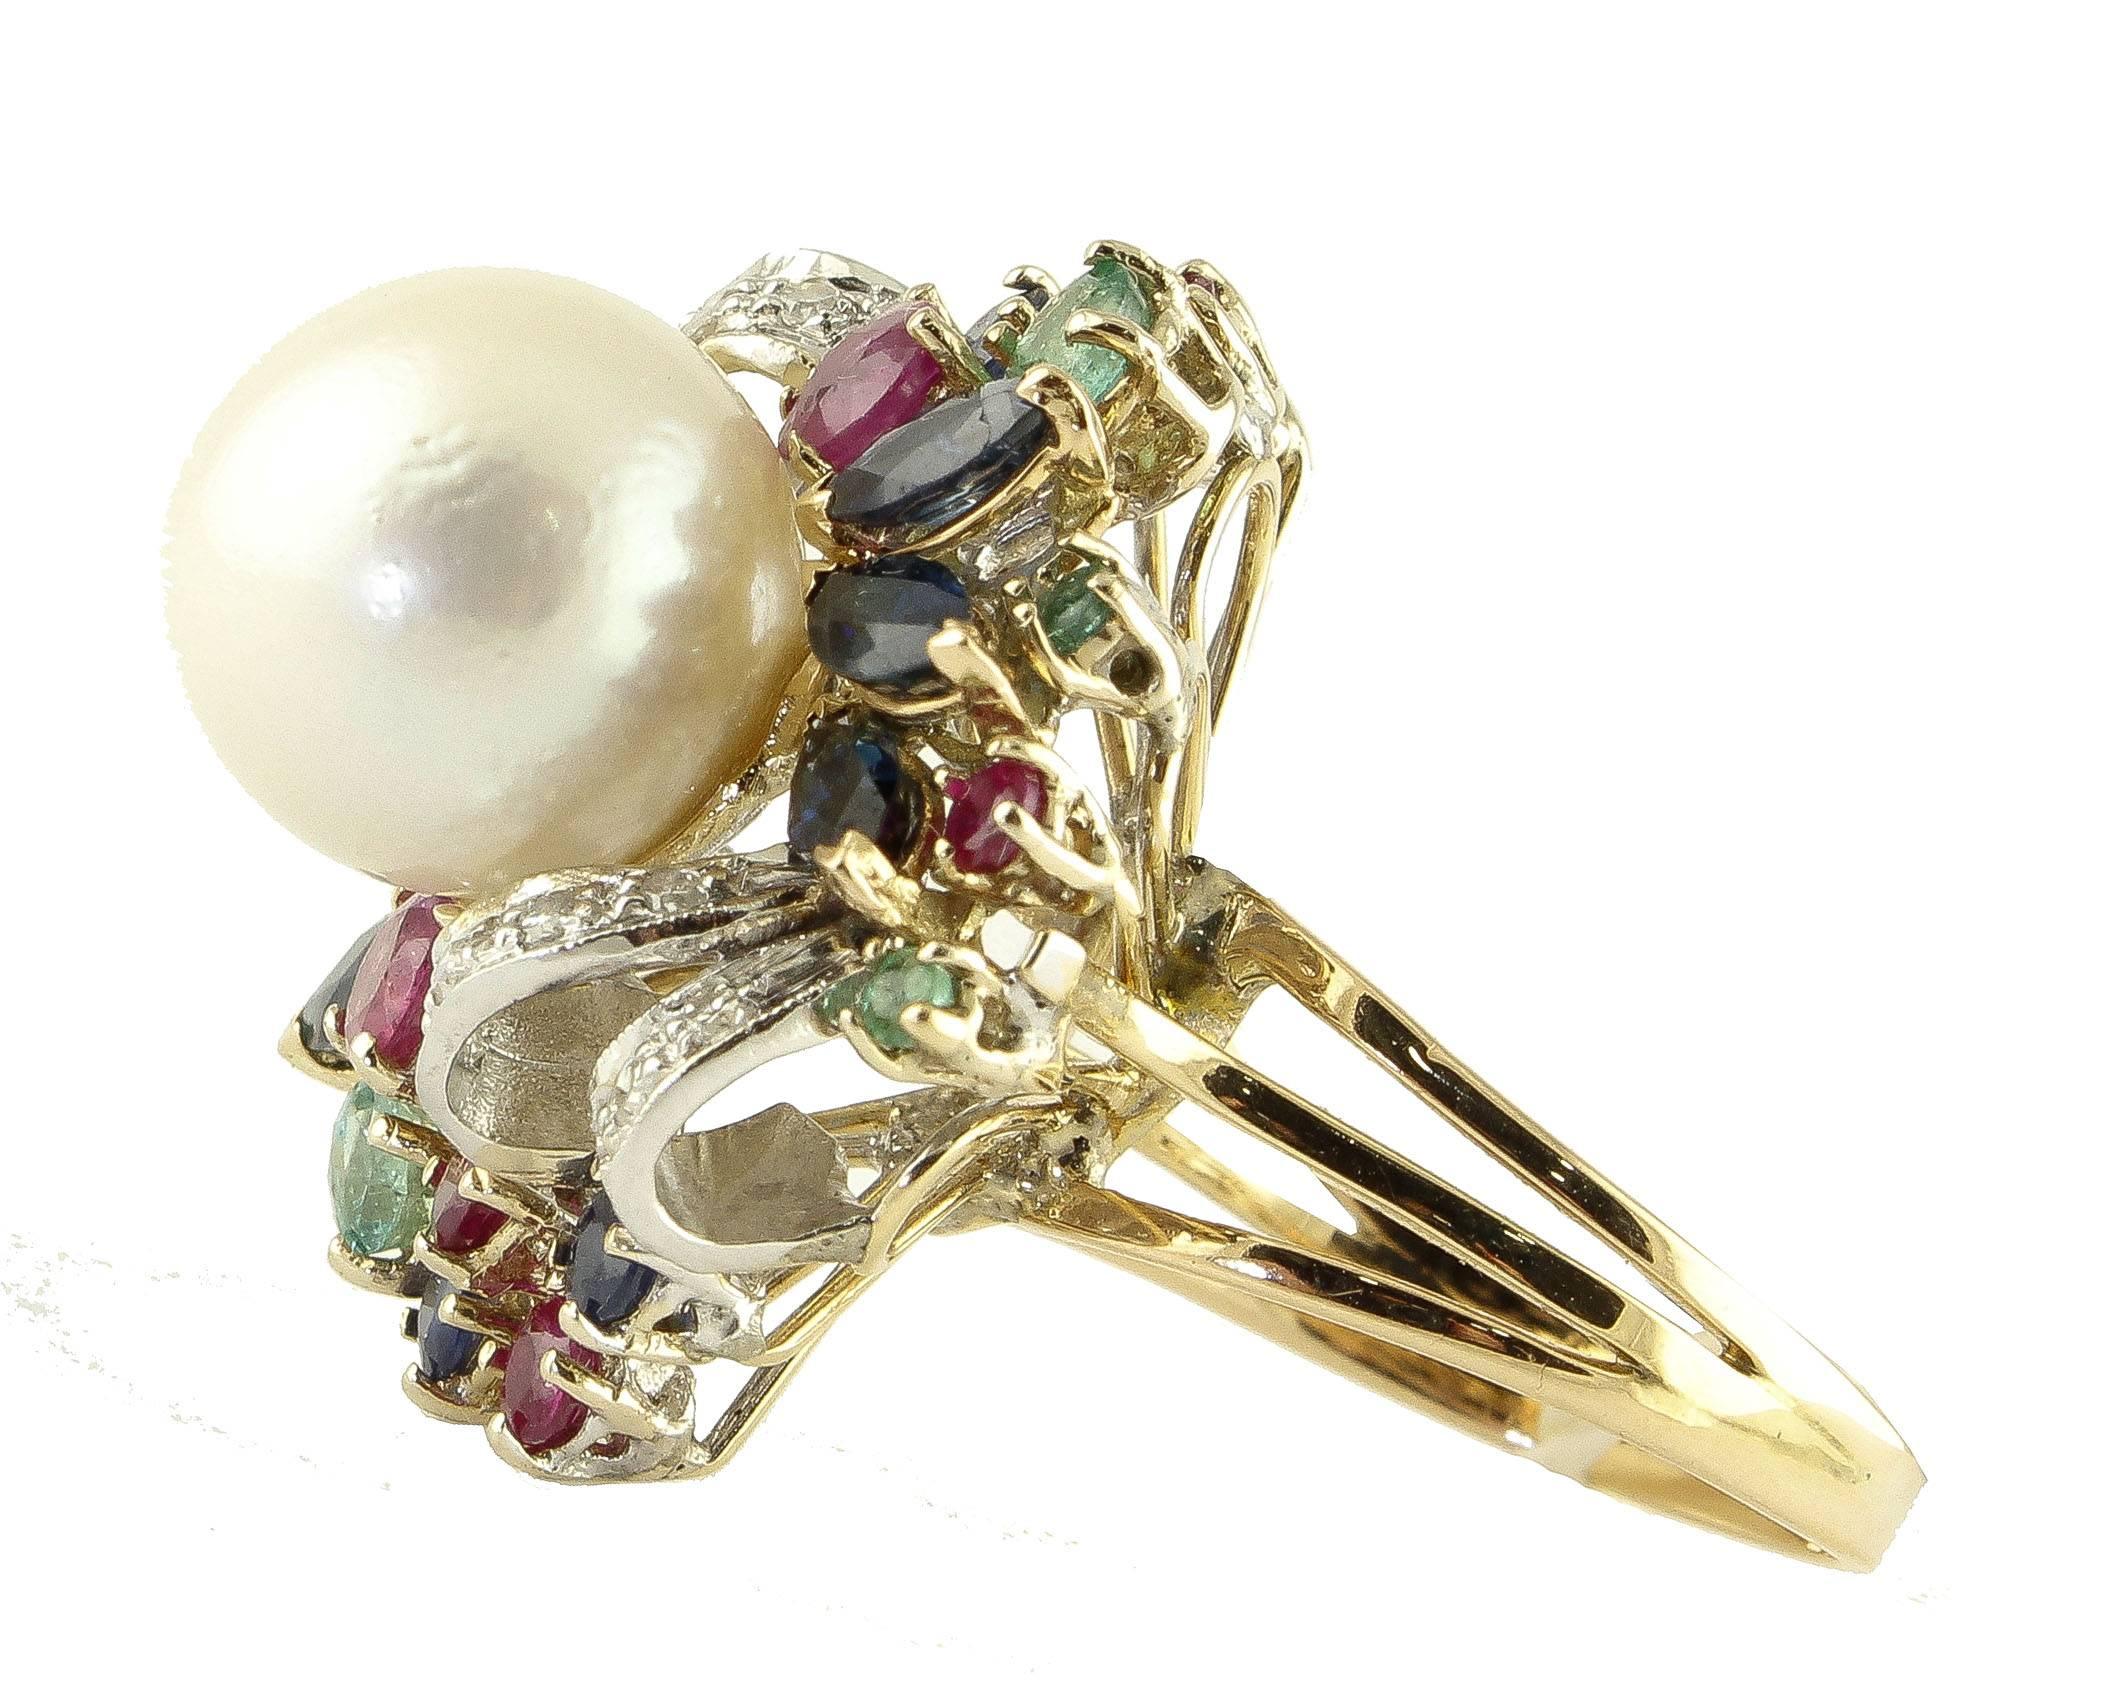 Fabulous 14 kt white and rose gold ring, composed of emeralds, sapphires, rubies, white diamonds and a very beautiful gilded Australian pearl. 
Diamonds ct 0.24
Pearl g 2.8 / mm 12
Emeralds, Rubies, Sapphires ct 3.97
Size Italian 17
Size French